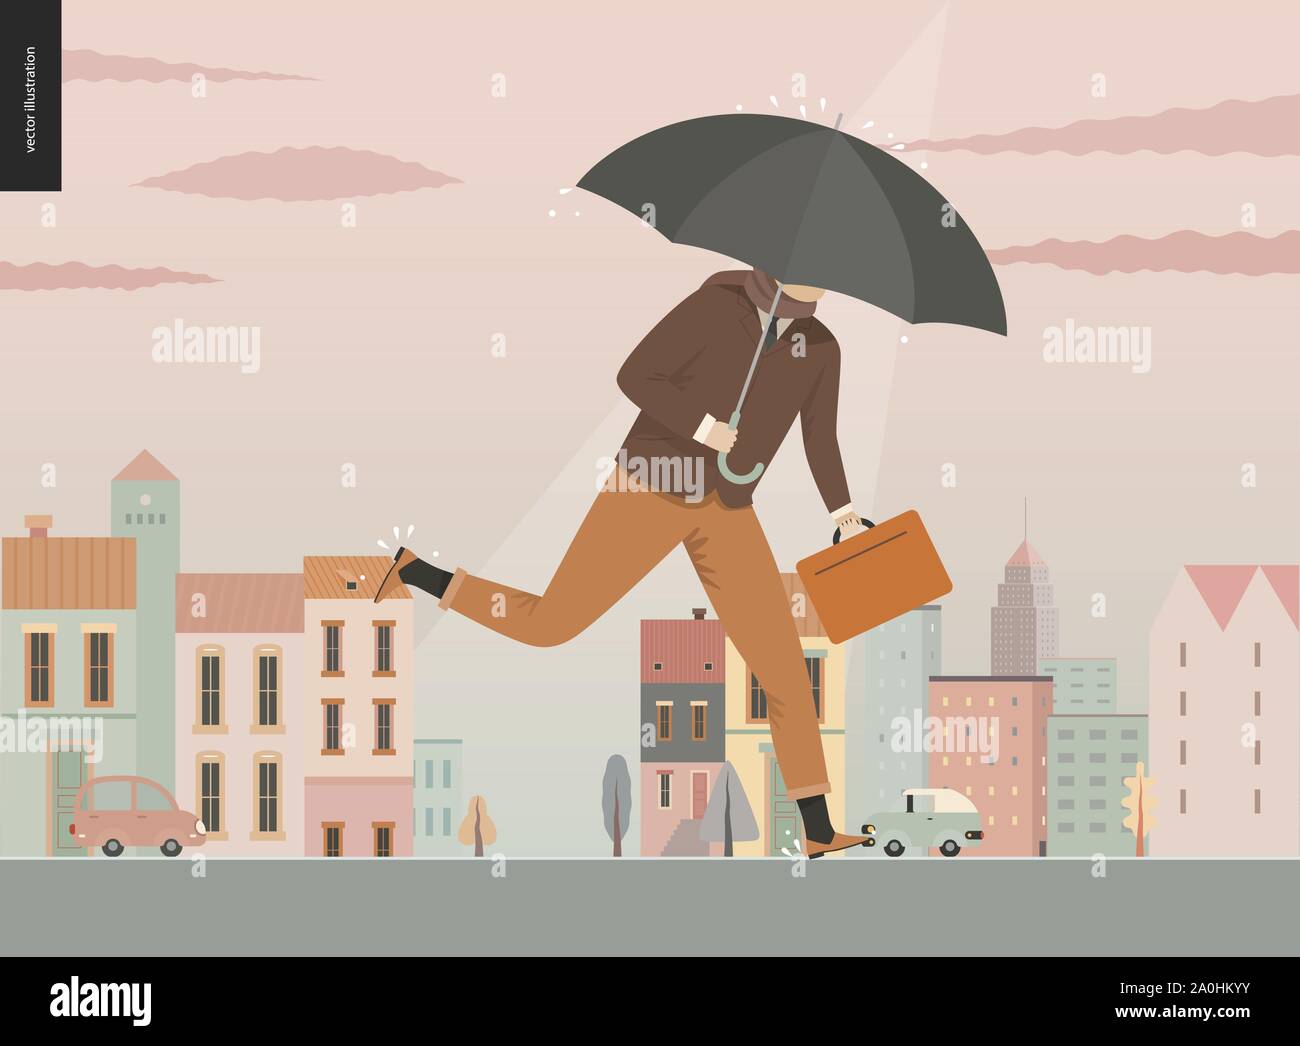 Rain - running businessman -modern flat vector concept illustration of an adult man wearing suit, with an umbrella and suitcase, running under the rai Stock Vector